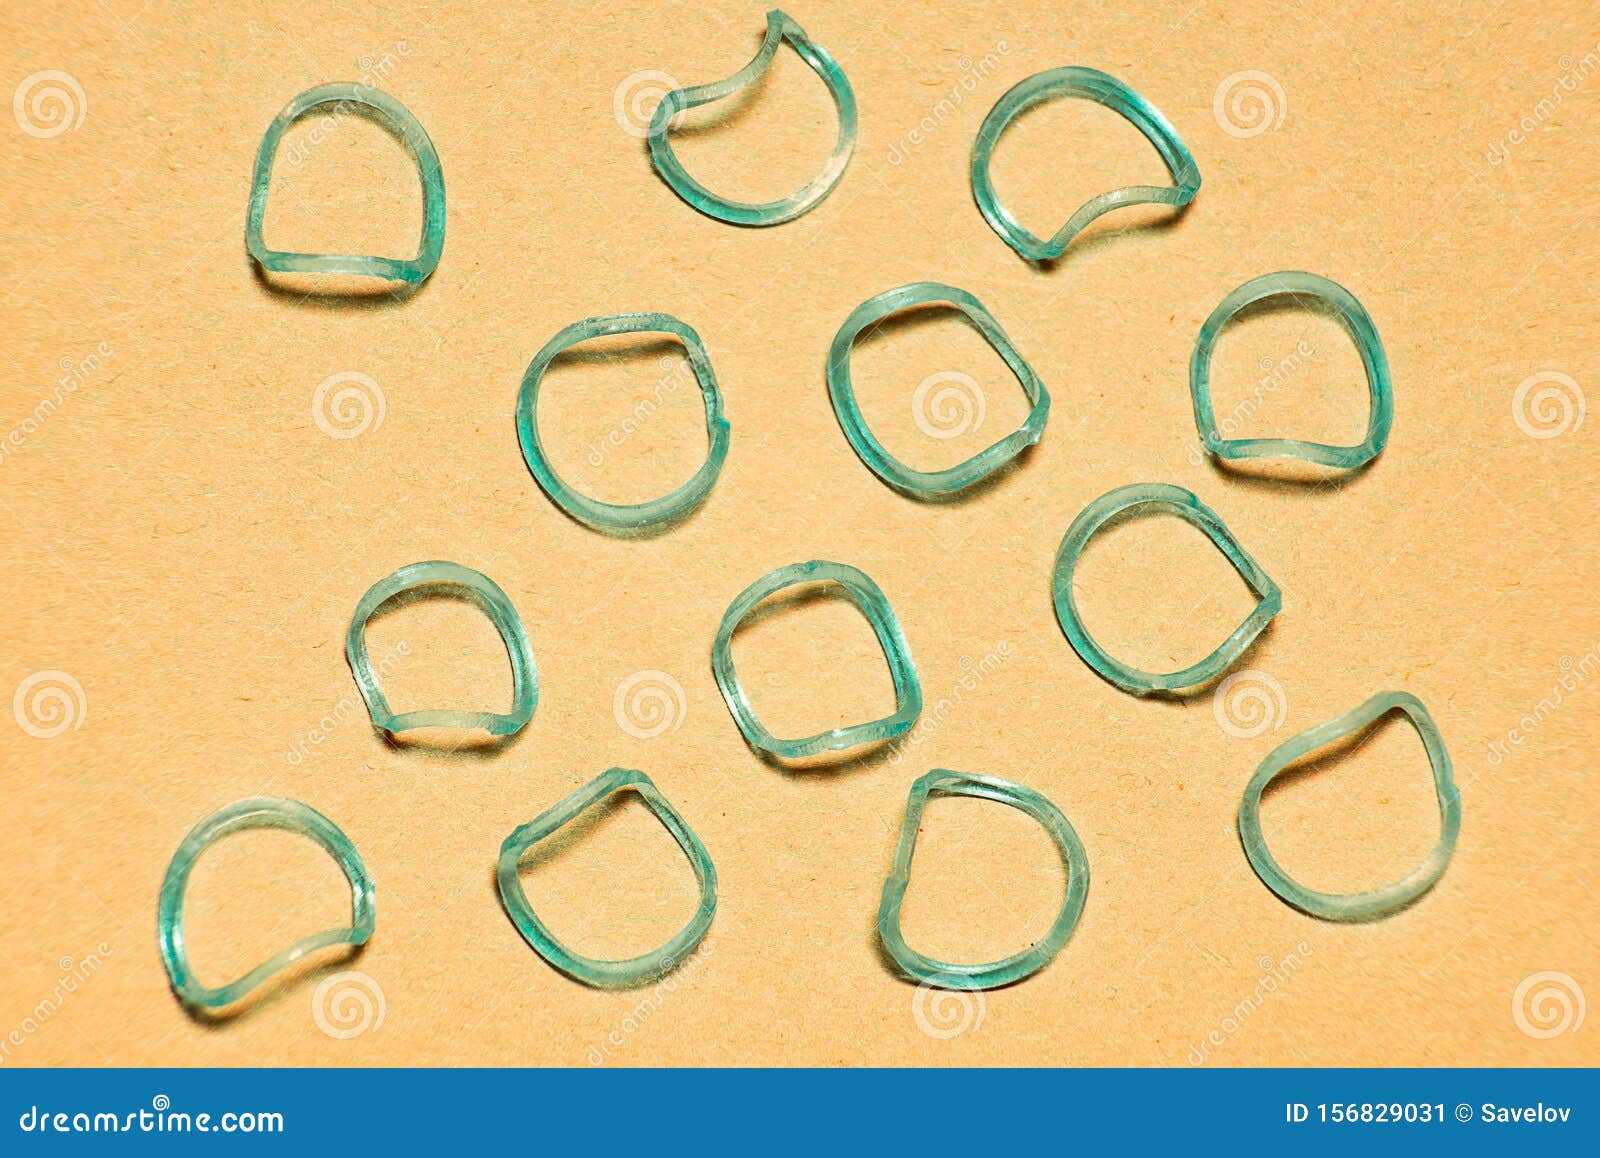 The History and Evolution of Blue Rubber Bands in Hair - wide 4